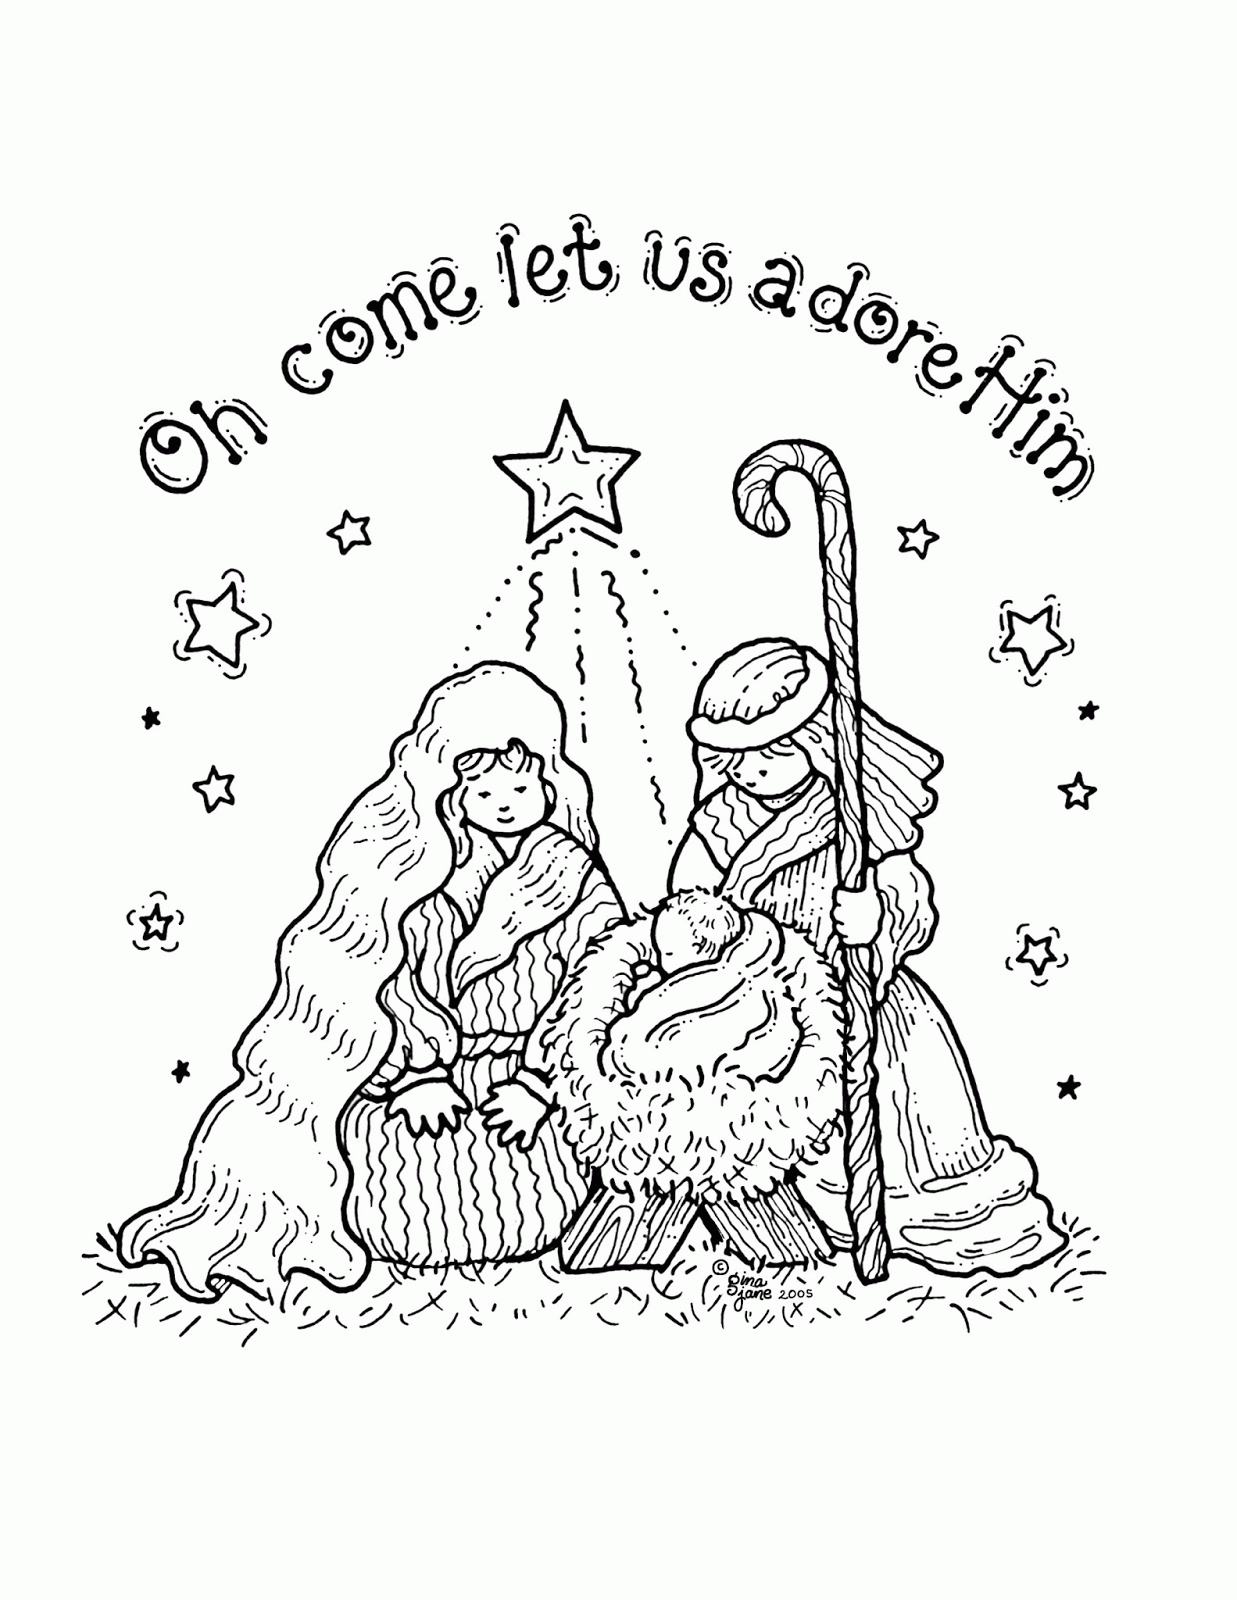 free-printable-jesus-coloring-pages